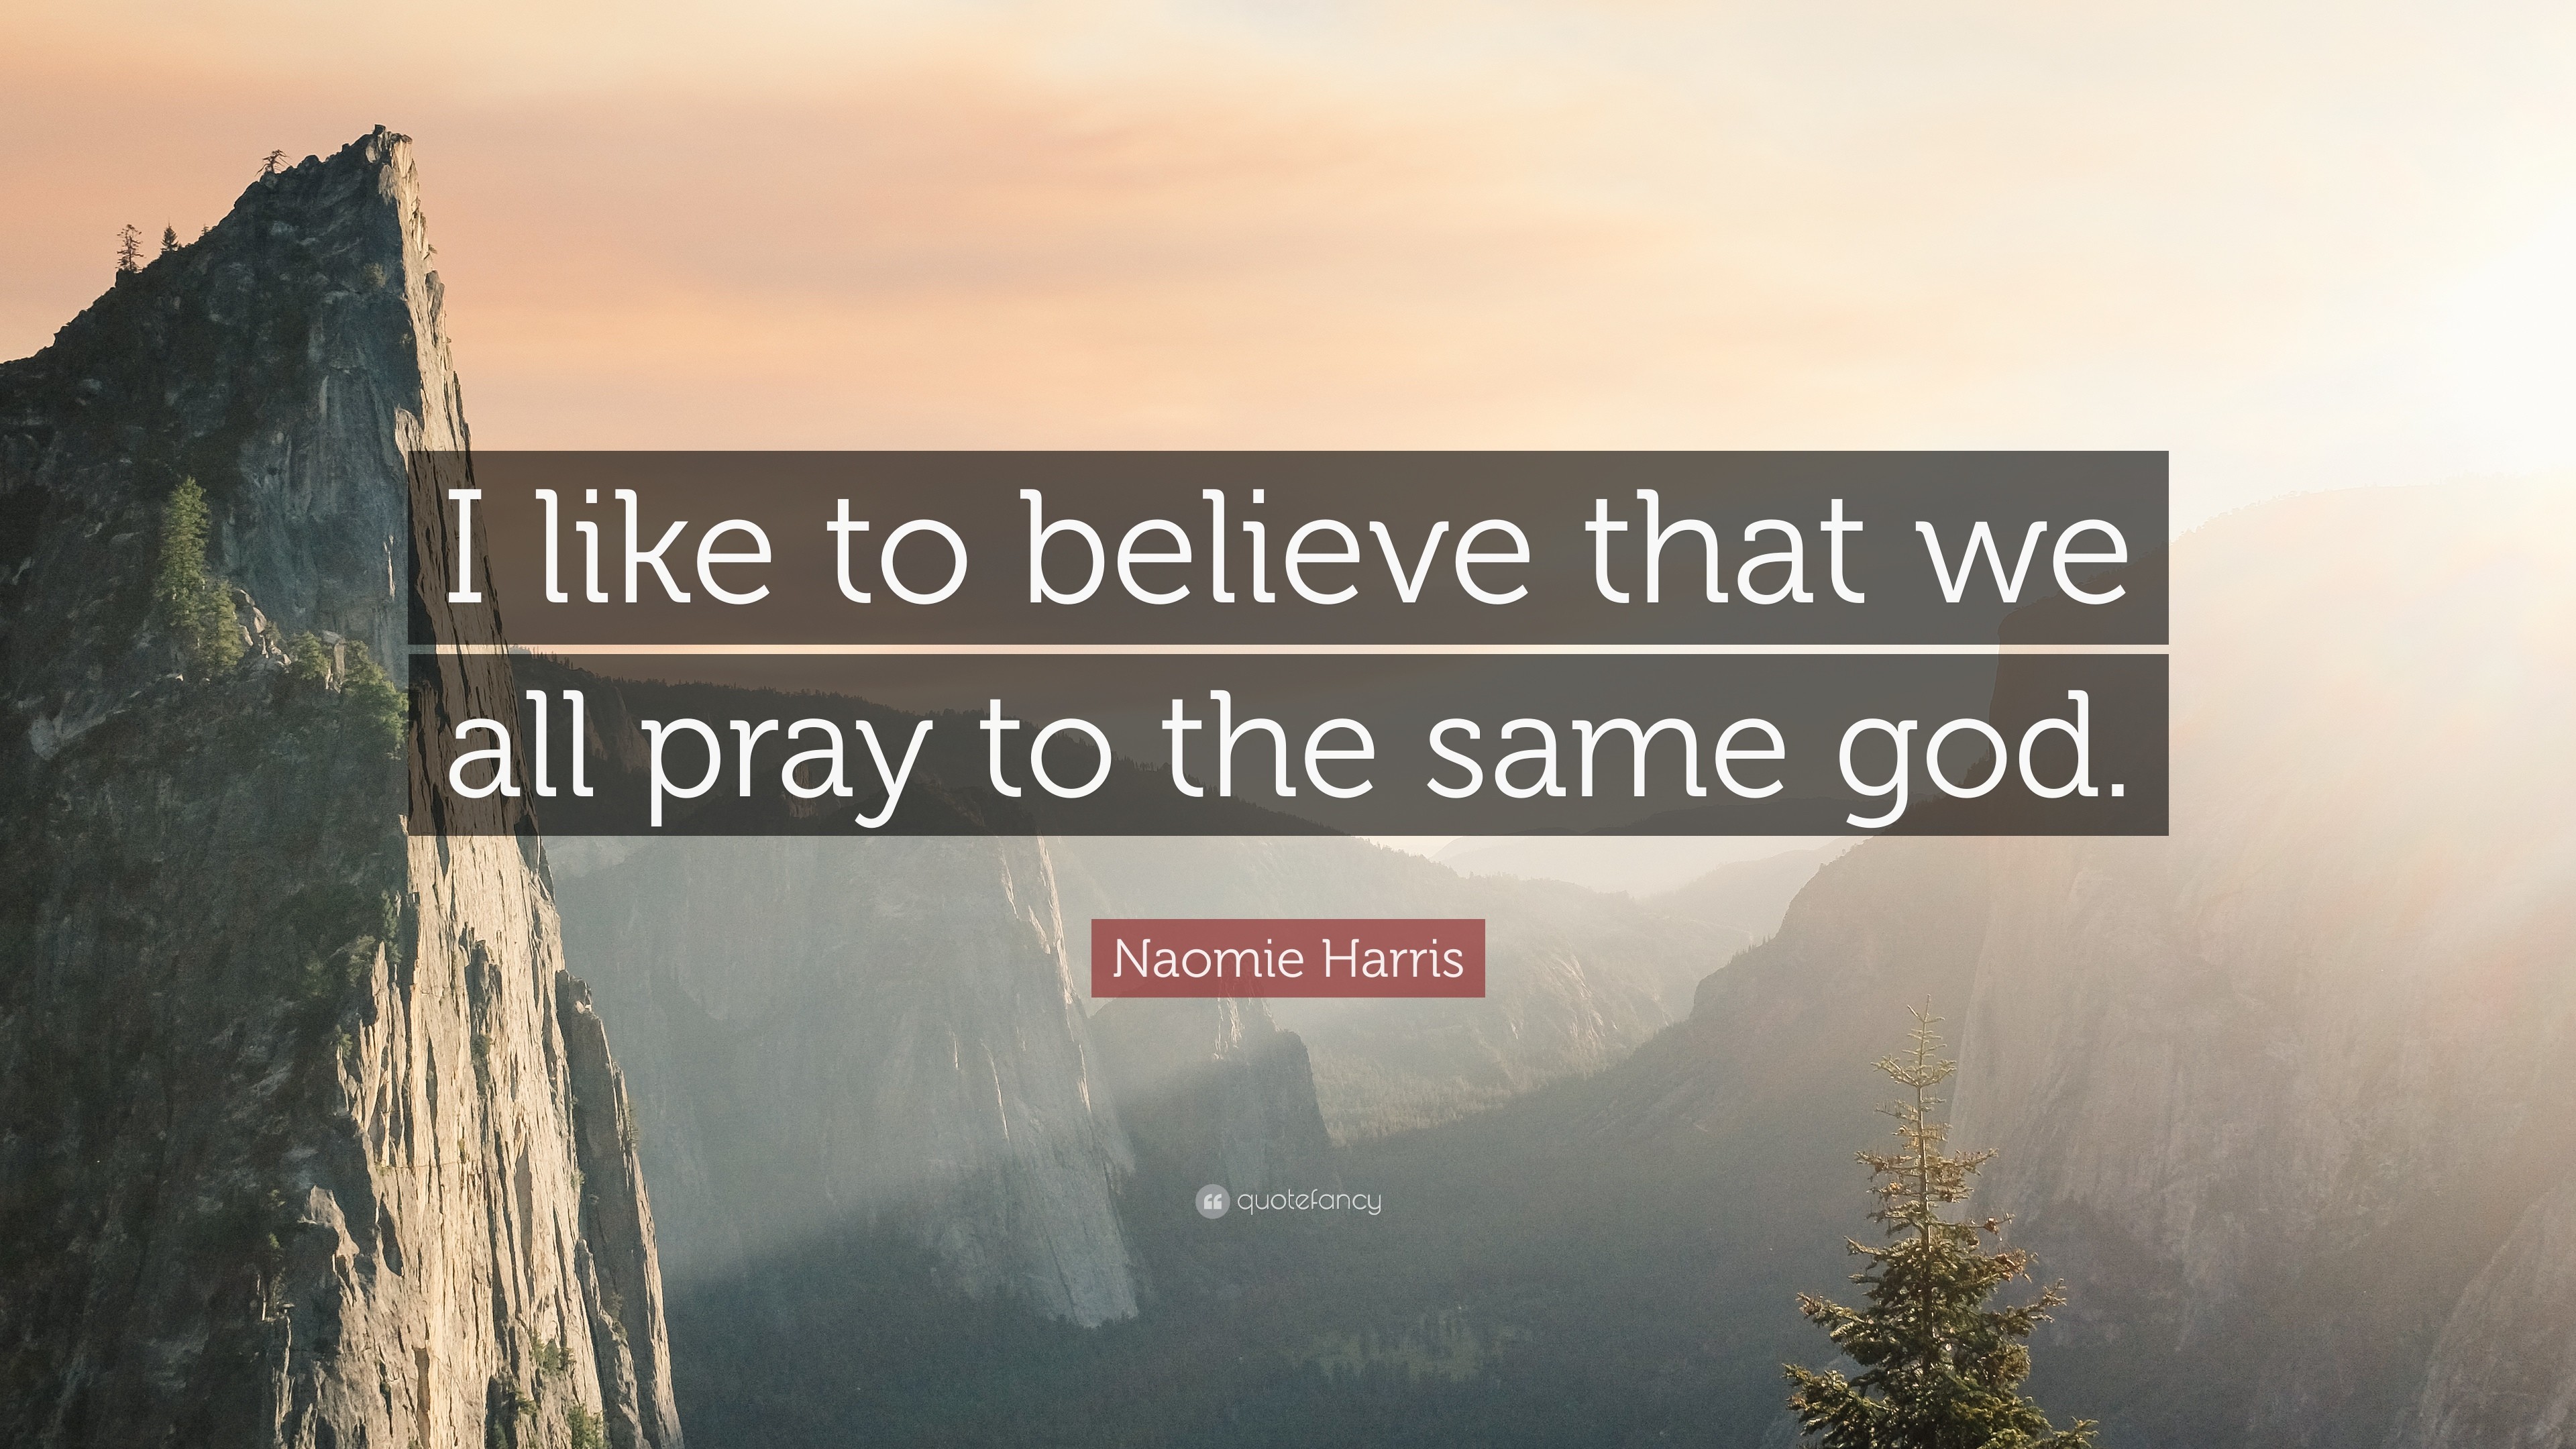 Naomie Harris Quote: “I like to believe that we all pray to the same